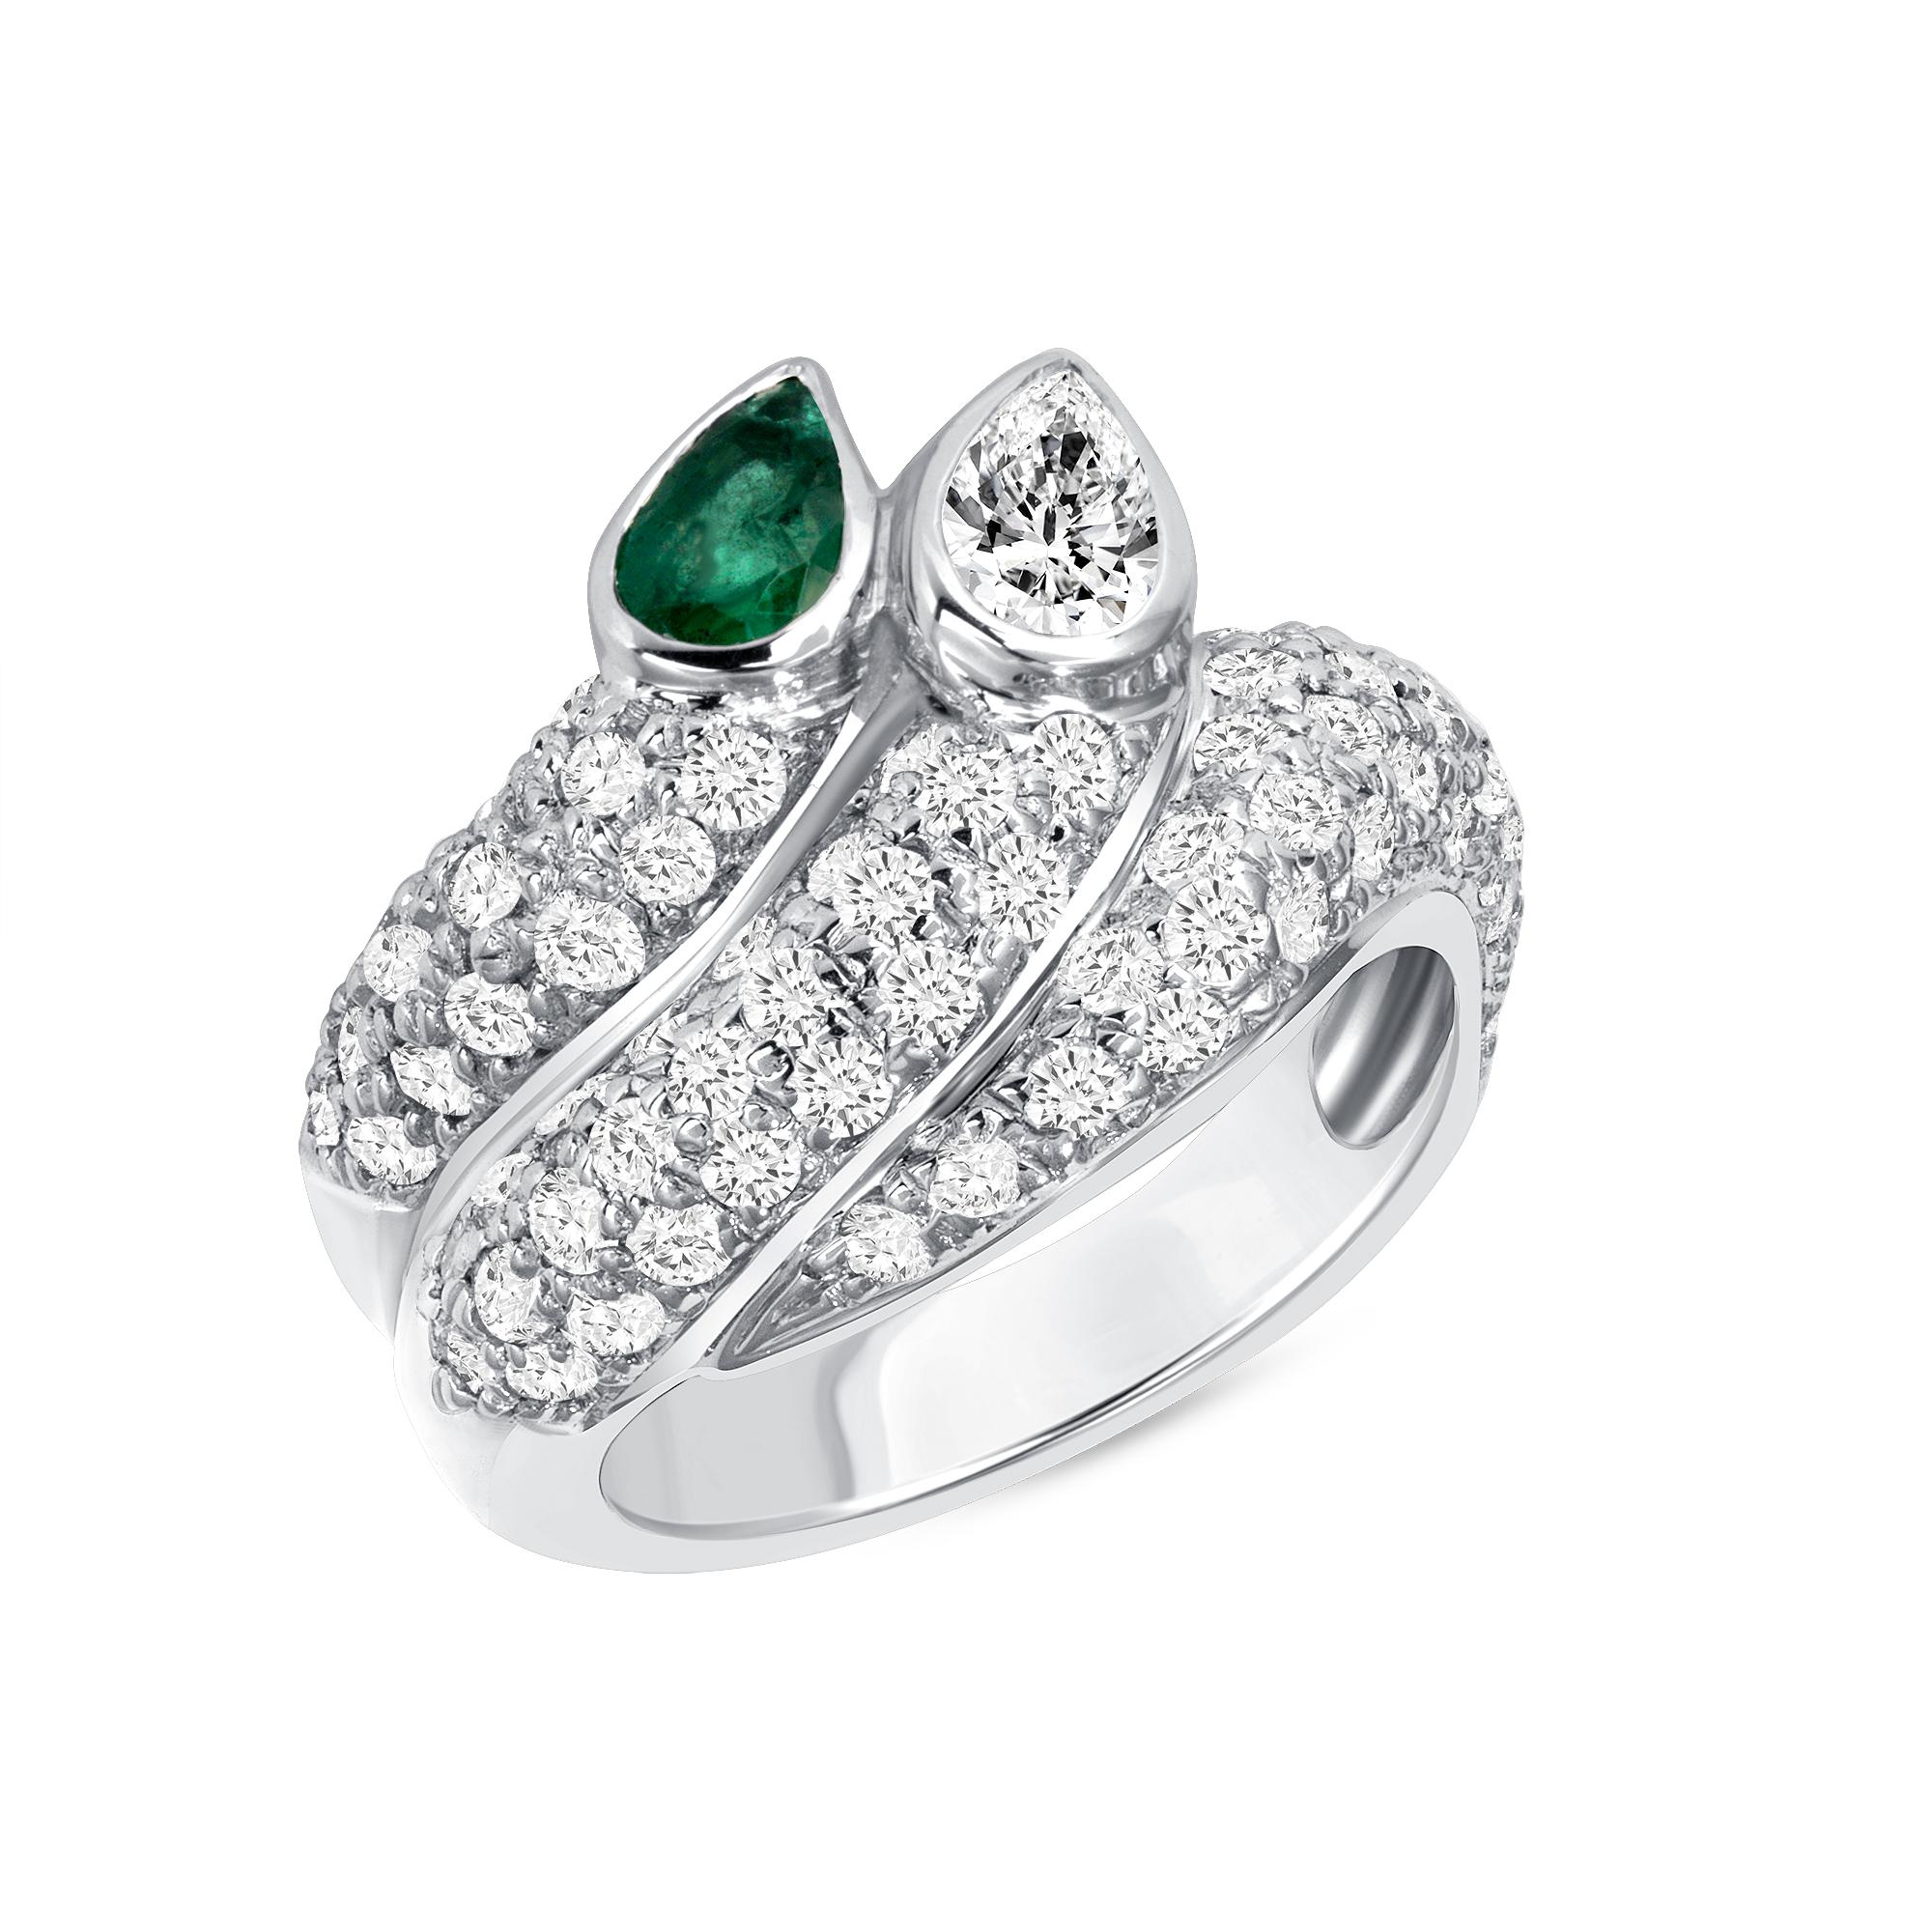 14K White Gold Ring 
1.20 Carate White Genuine Diamond
0.25 Carat Pear Shape Diamond in the center
.25 Carat Green Natural Emerald
Total Gold Weight: 9.7 Grams